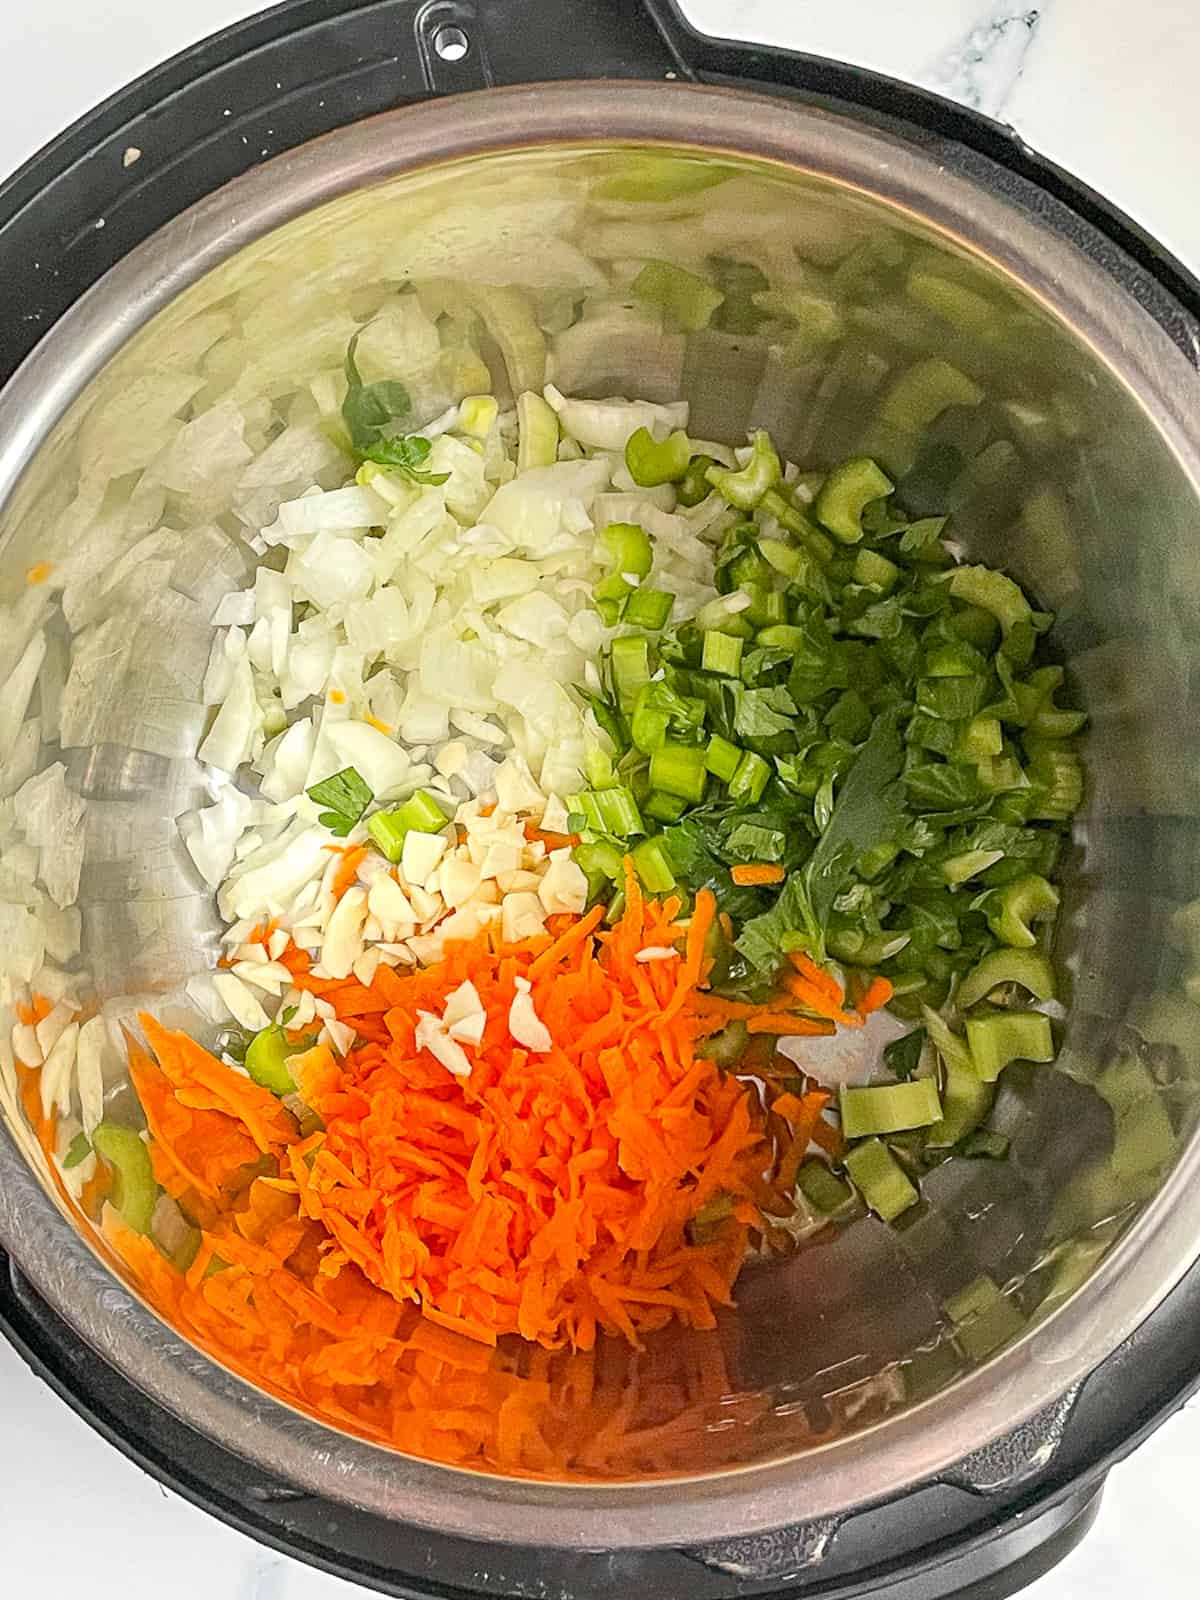 celery, onion, carrot, and garlic in the instant pot